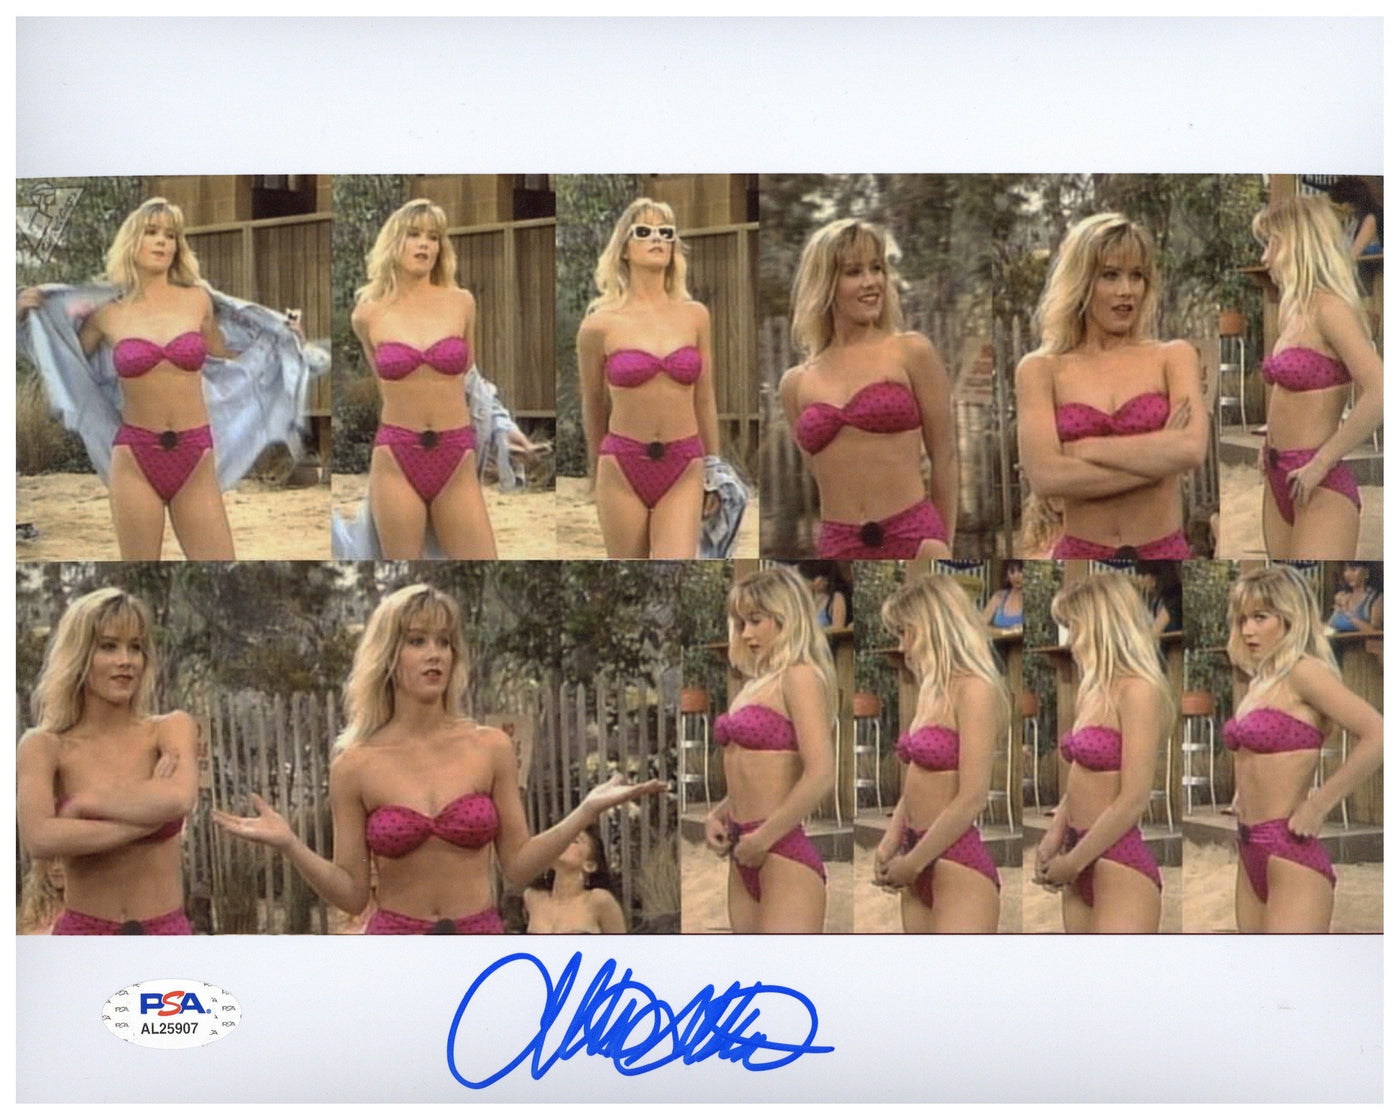 Christina Applegate Signed 8x10 Photo Married with Children Autographed PSA COA